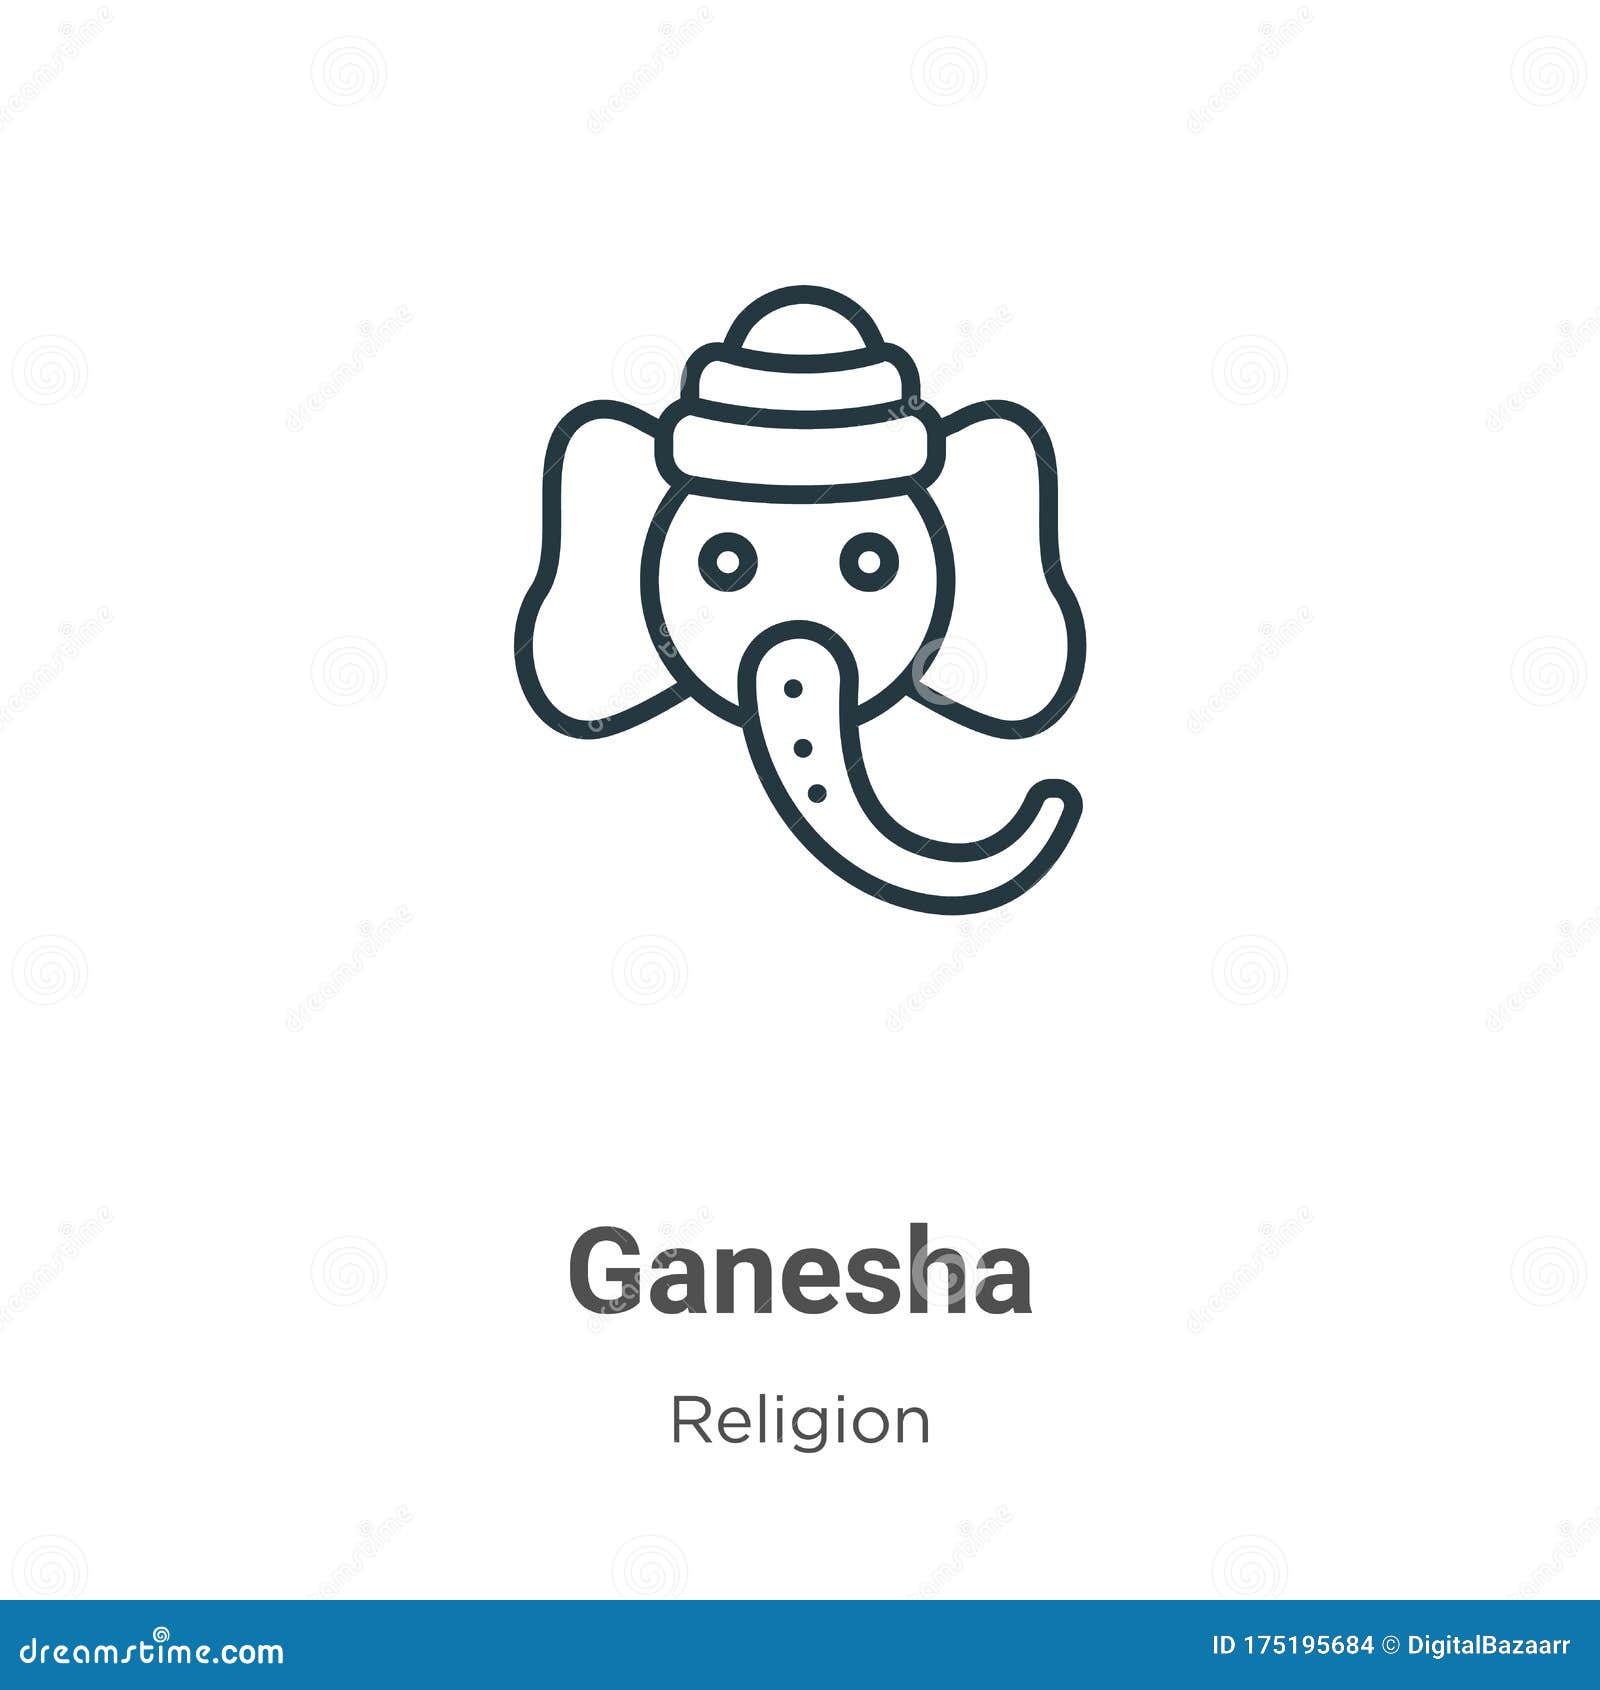 Ganesha Drawing Step By Step || How To Draw Ganesha || Easy Ganesh Drawing  || Pencil Drawing | Hello! Ganesha Drawing Step By Step || How To Draw  Ganesha || Easy Ganesh